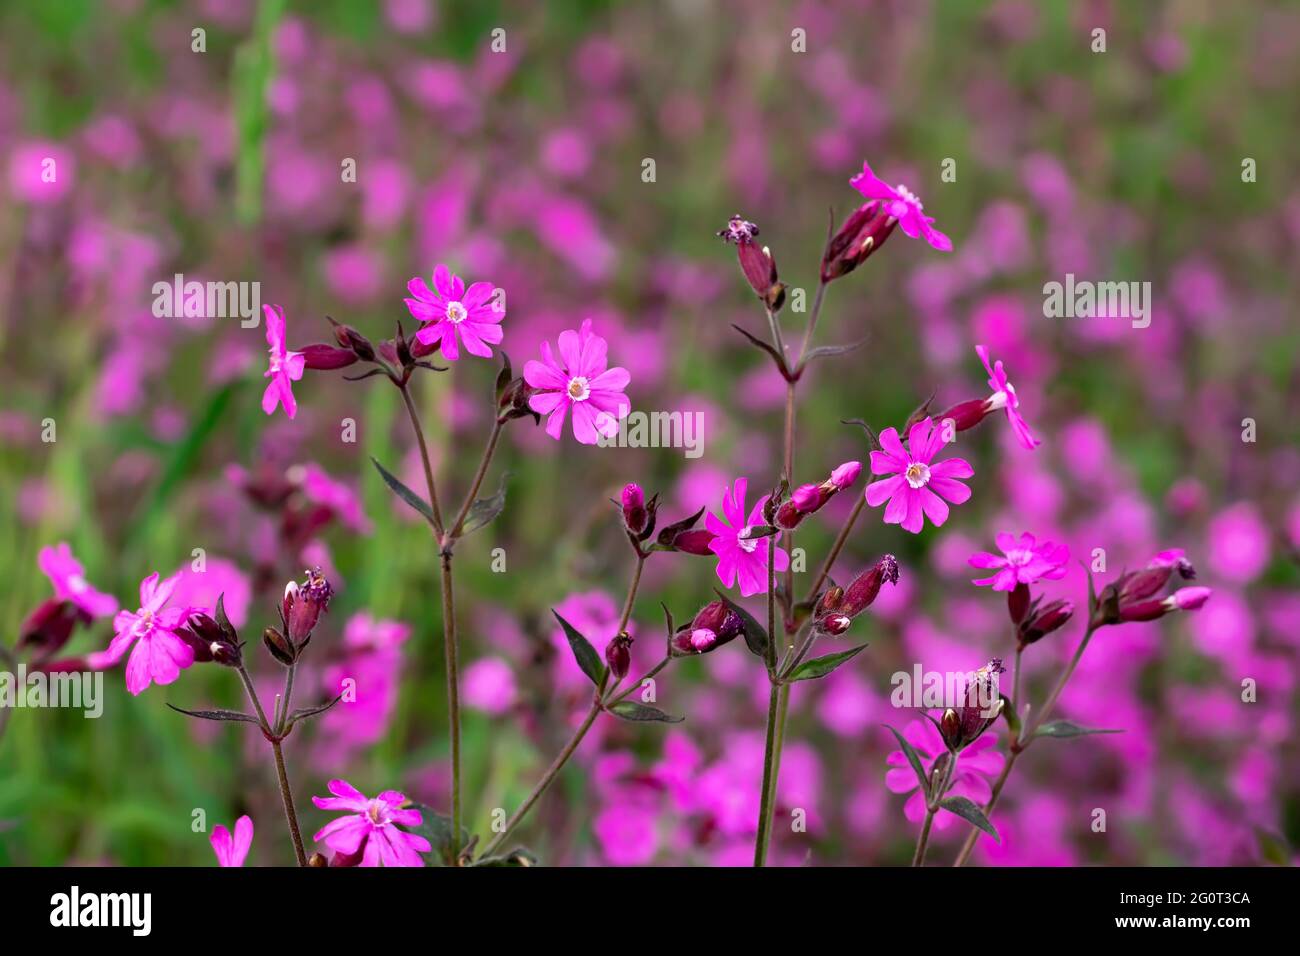 Flowers of a perennial plant Silene dioica known as Red campion or Red catchfly on a forest edge Stock Photo